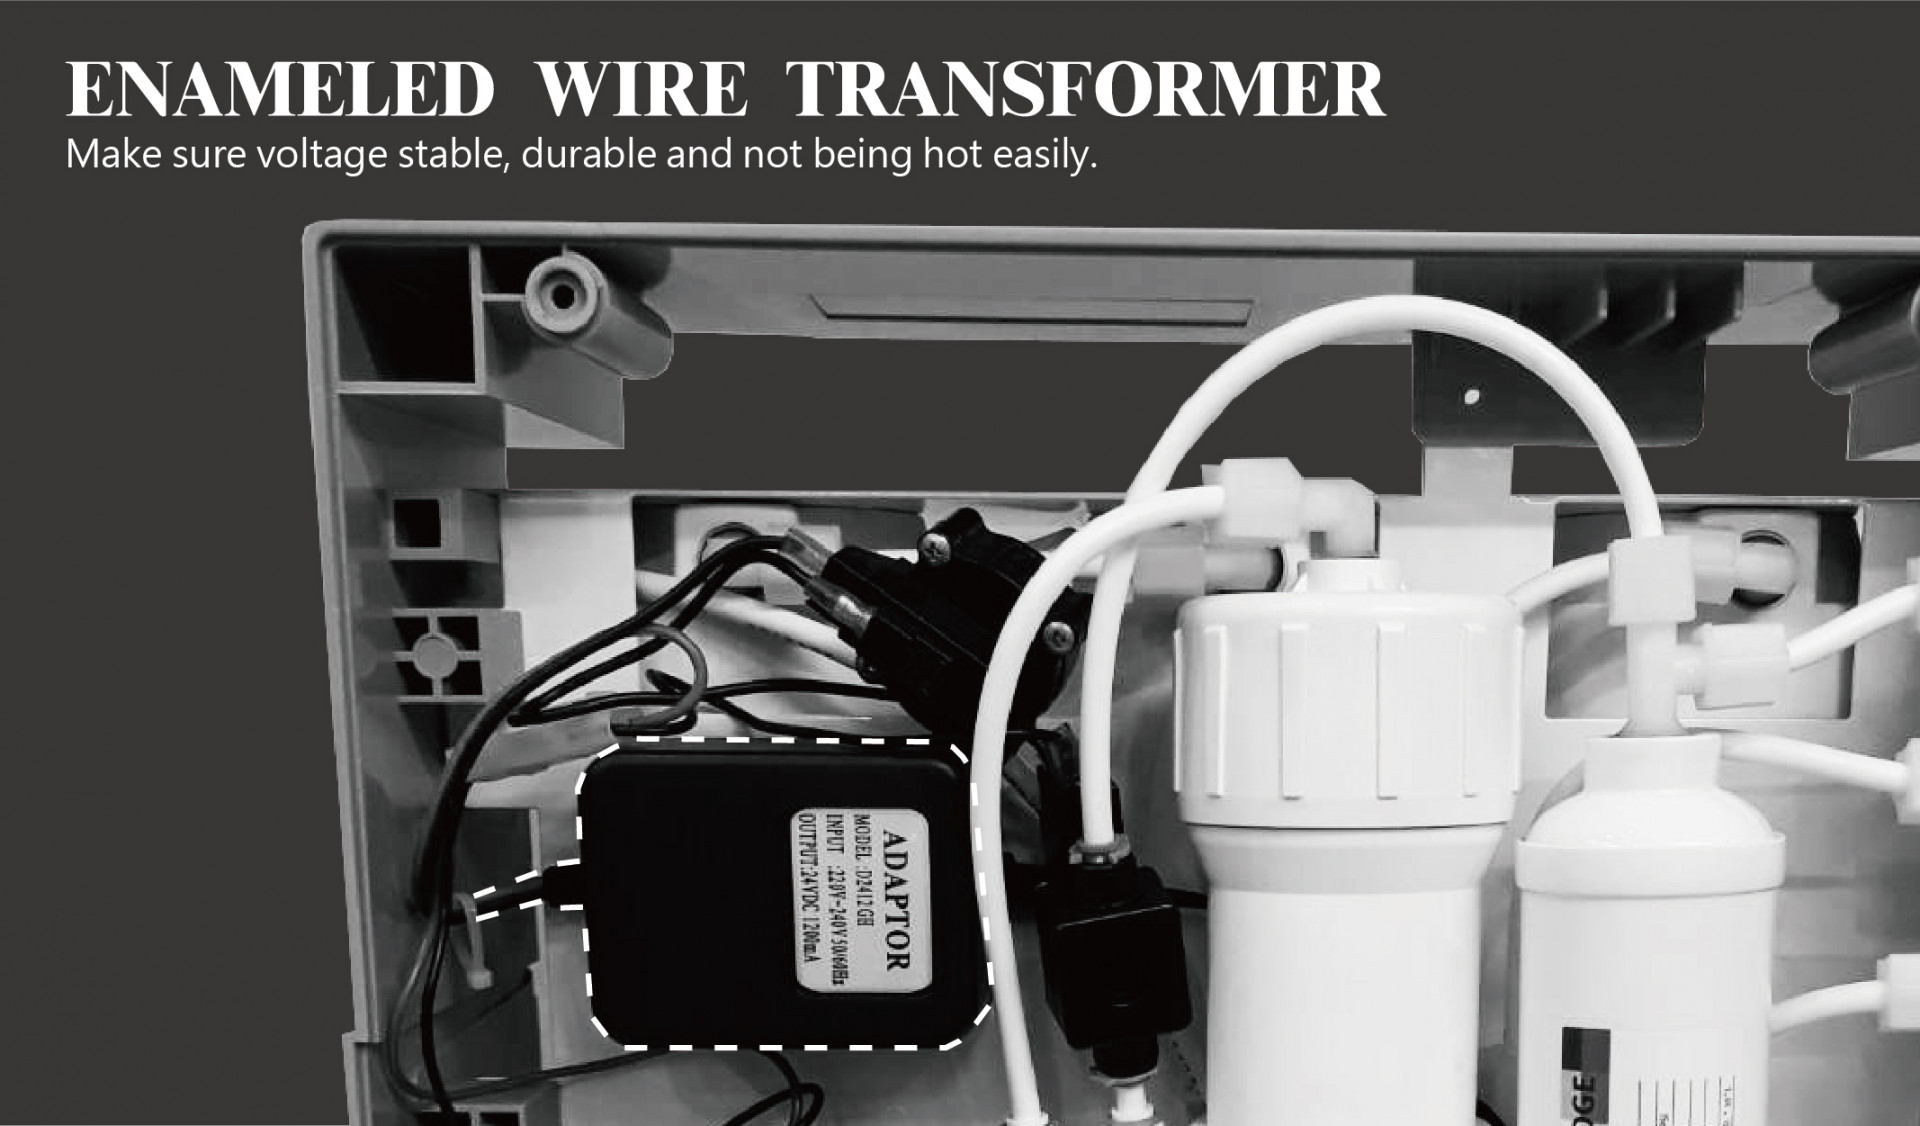 RO SYSTEM ENAMELED WIRE TRANSFORMER